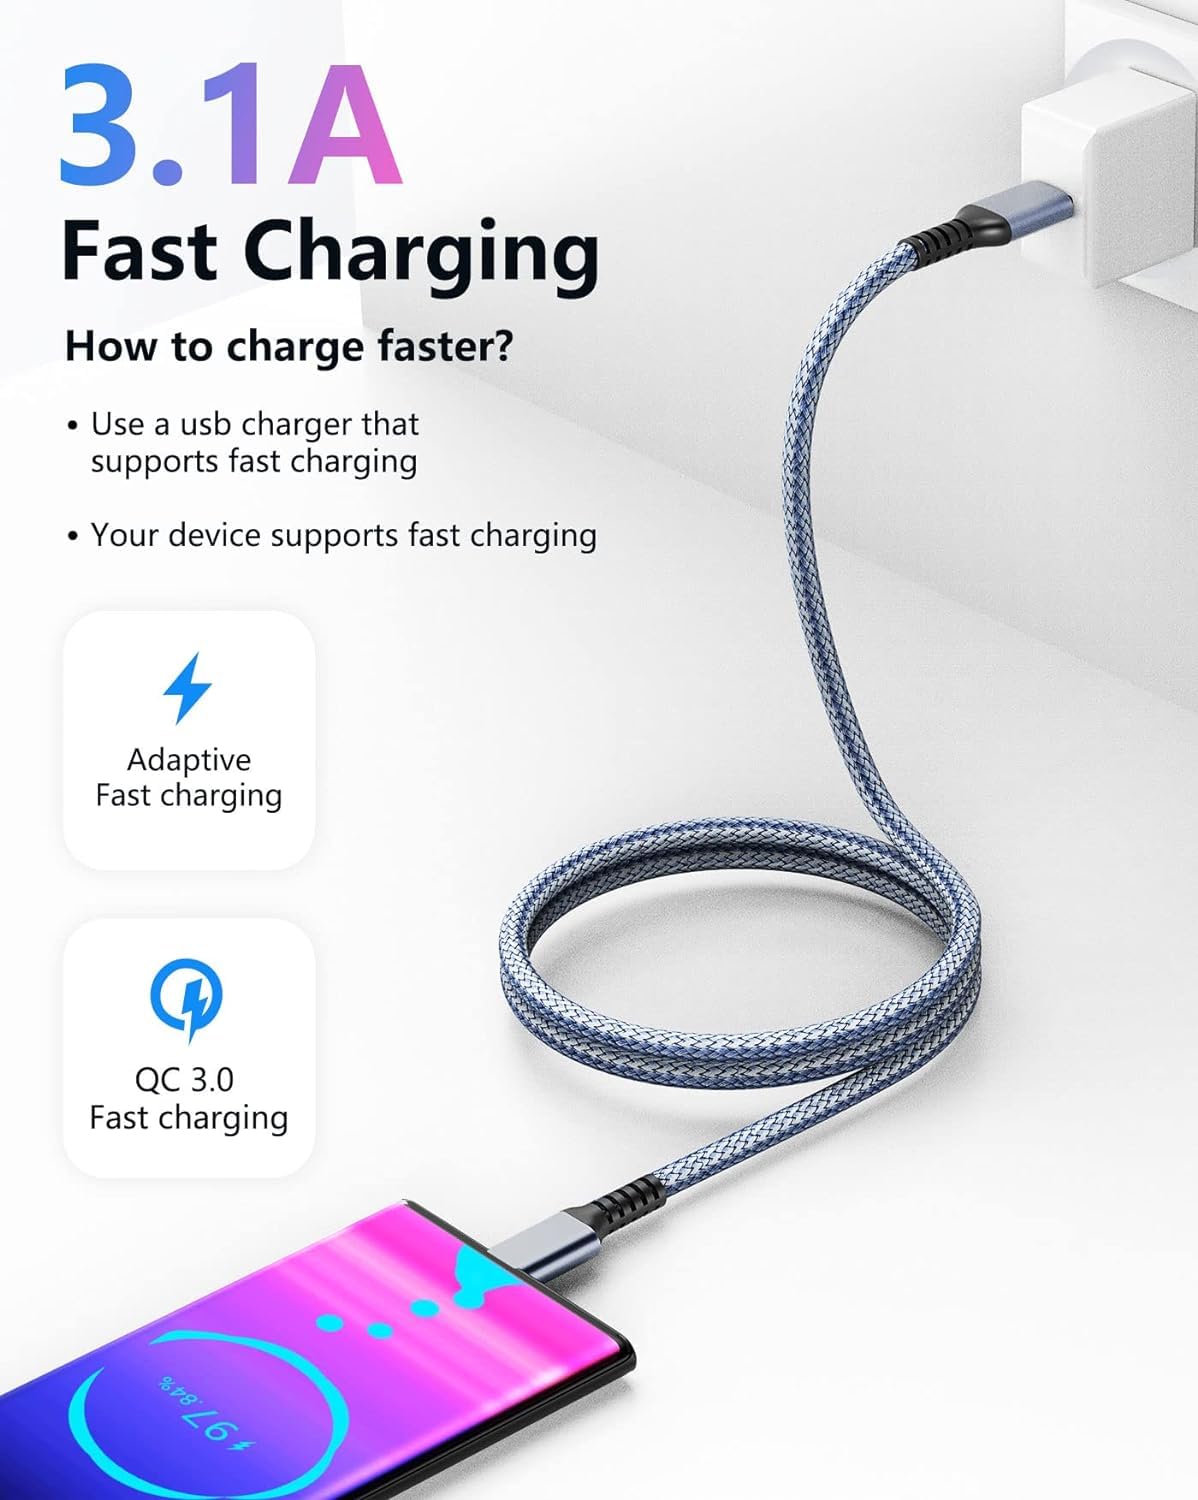 Fannoday USB C Cable 3ft, 3.2 Gen 2 USB A to C Cord, 10Gbps High Speed Data Transfer, 3.1A Type C Fast Charging Cable Compatible with Samsung Pixel Moto LG Phones SSD Powerbank Tablets Laptop, 1 Pack